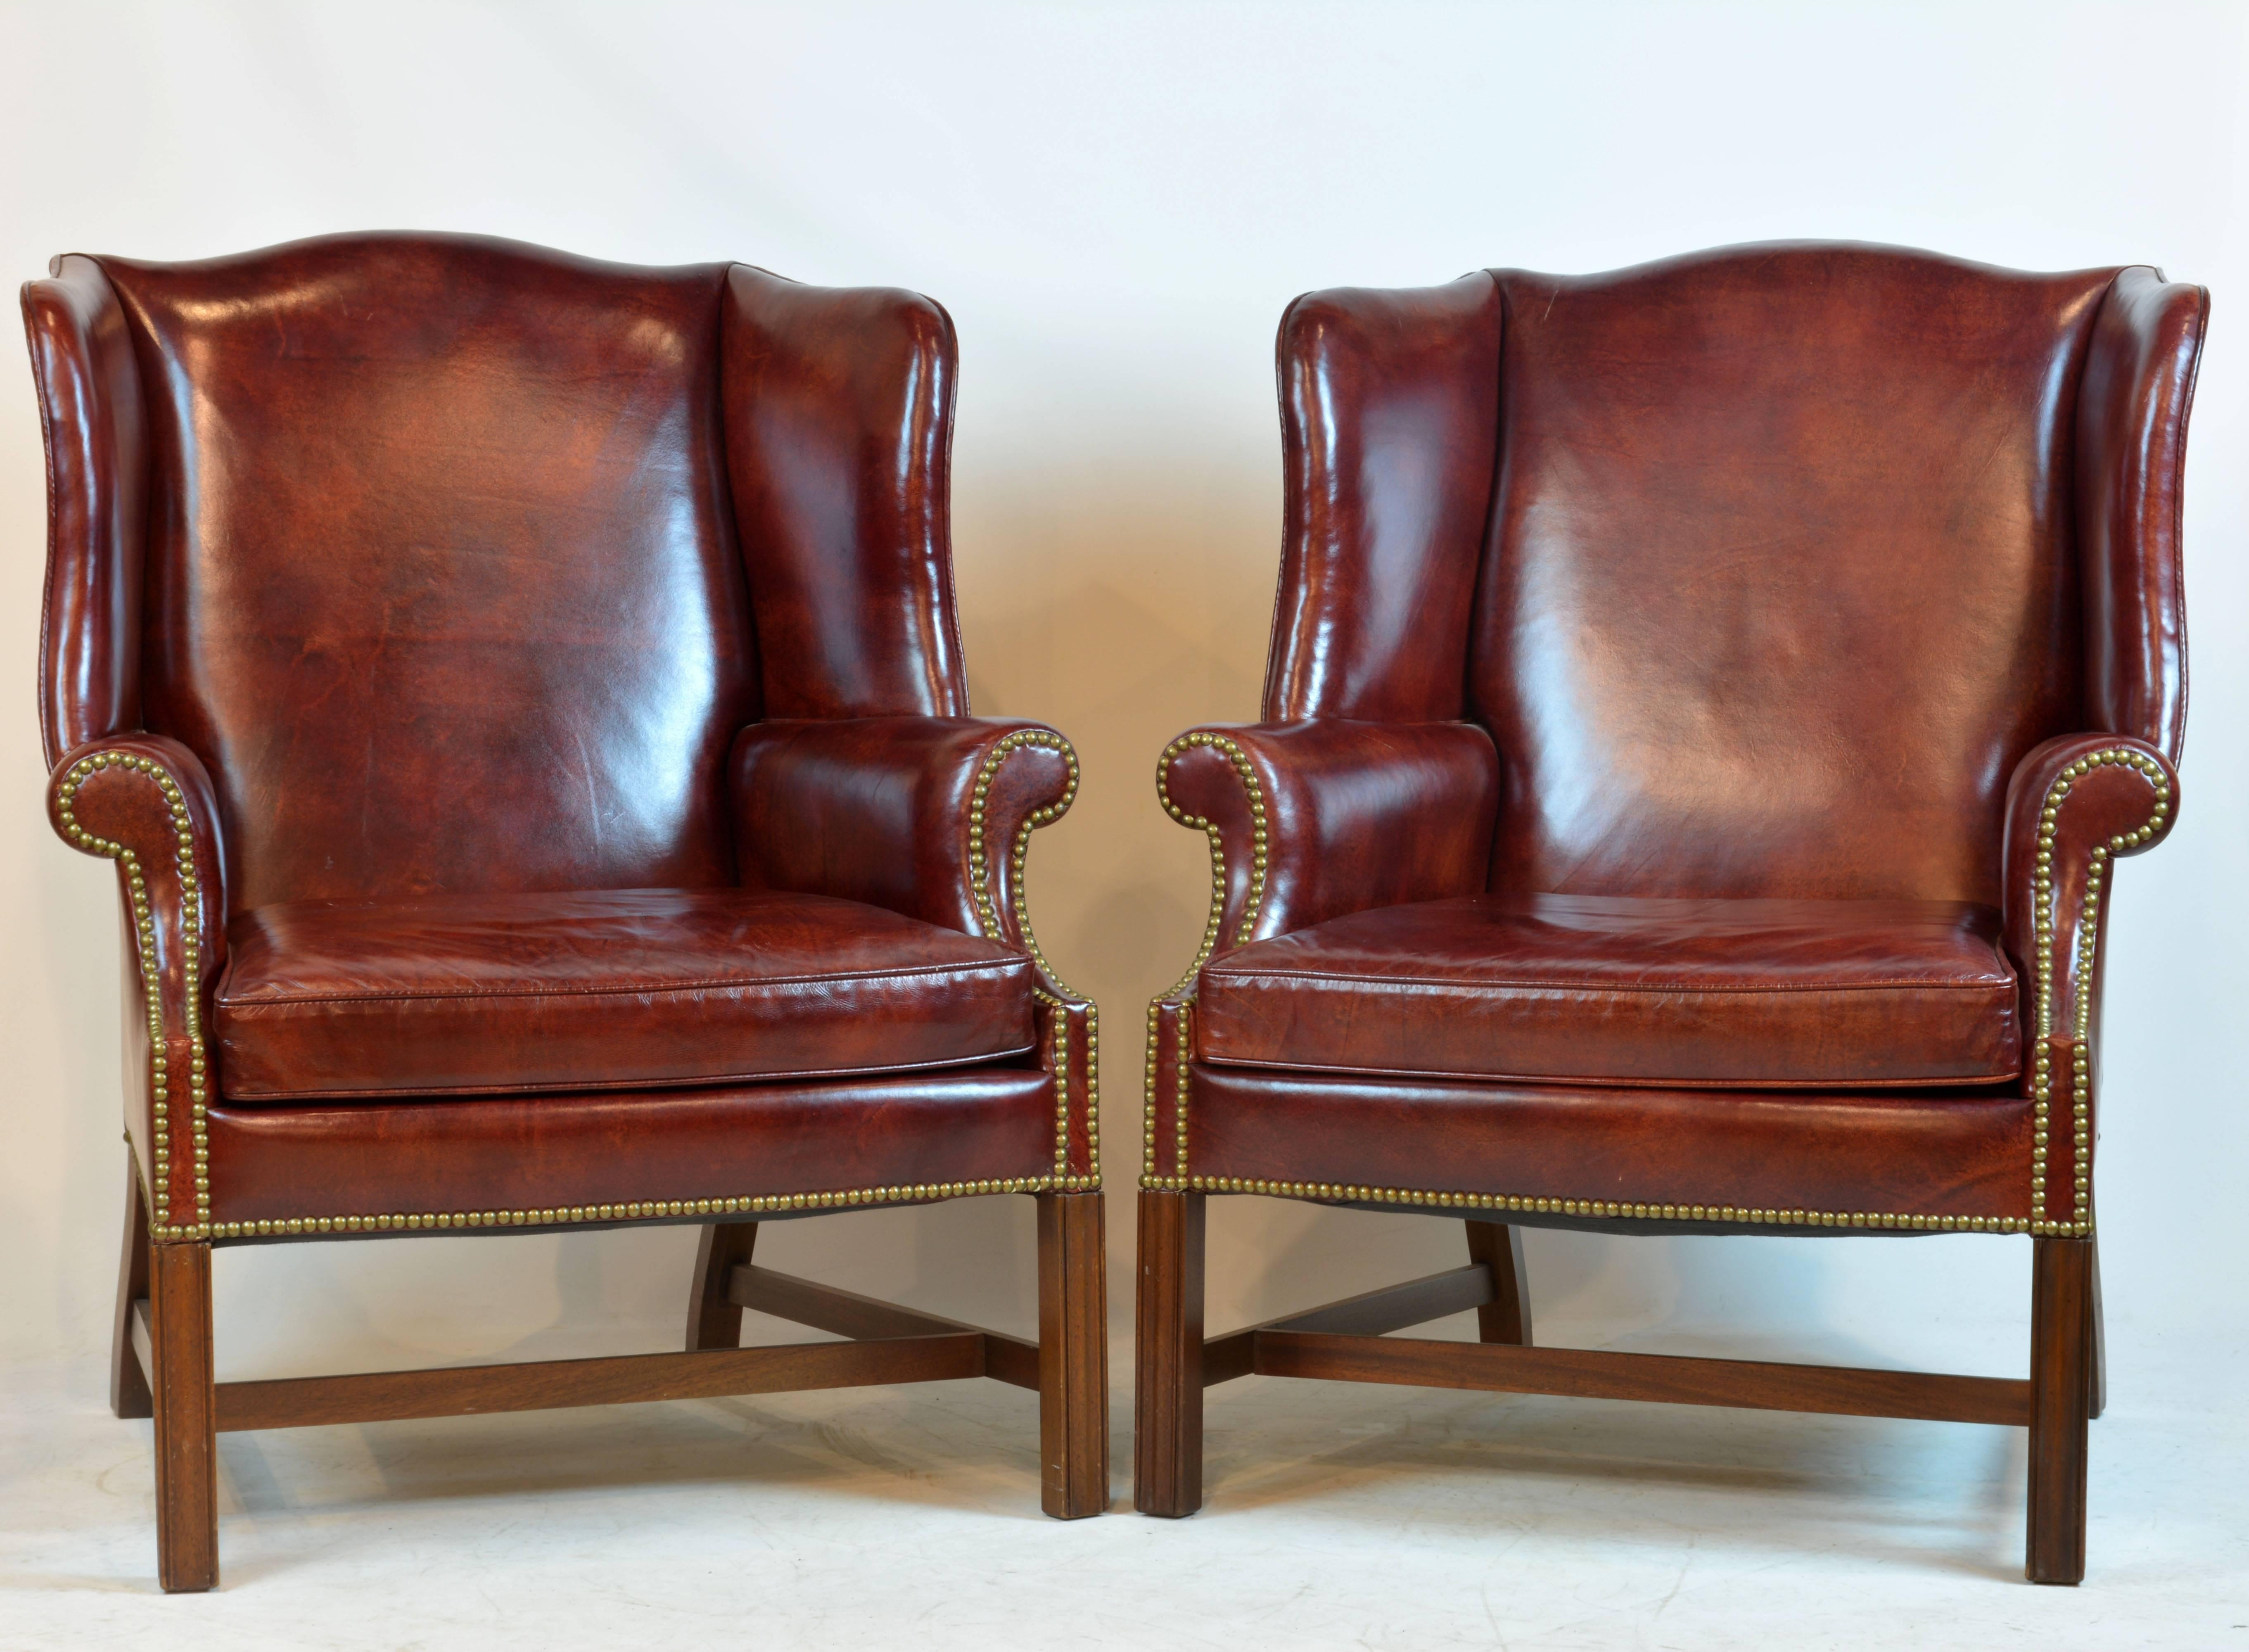 Beautifully accented by traditional brass nailhead trim these fine Georgian style burgundy brown leather covered chairs feature large scrolled wings above a loose cushion seat supported by four square chamfered legs joined by stretchers.